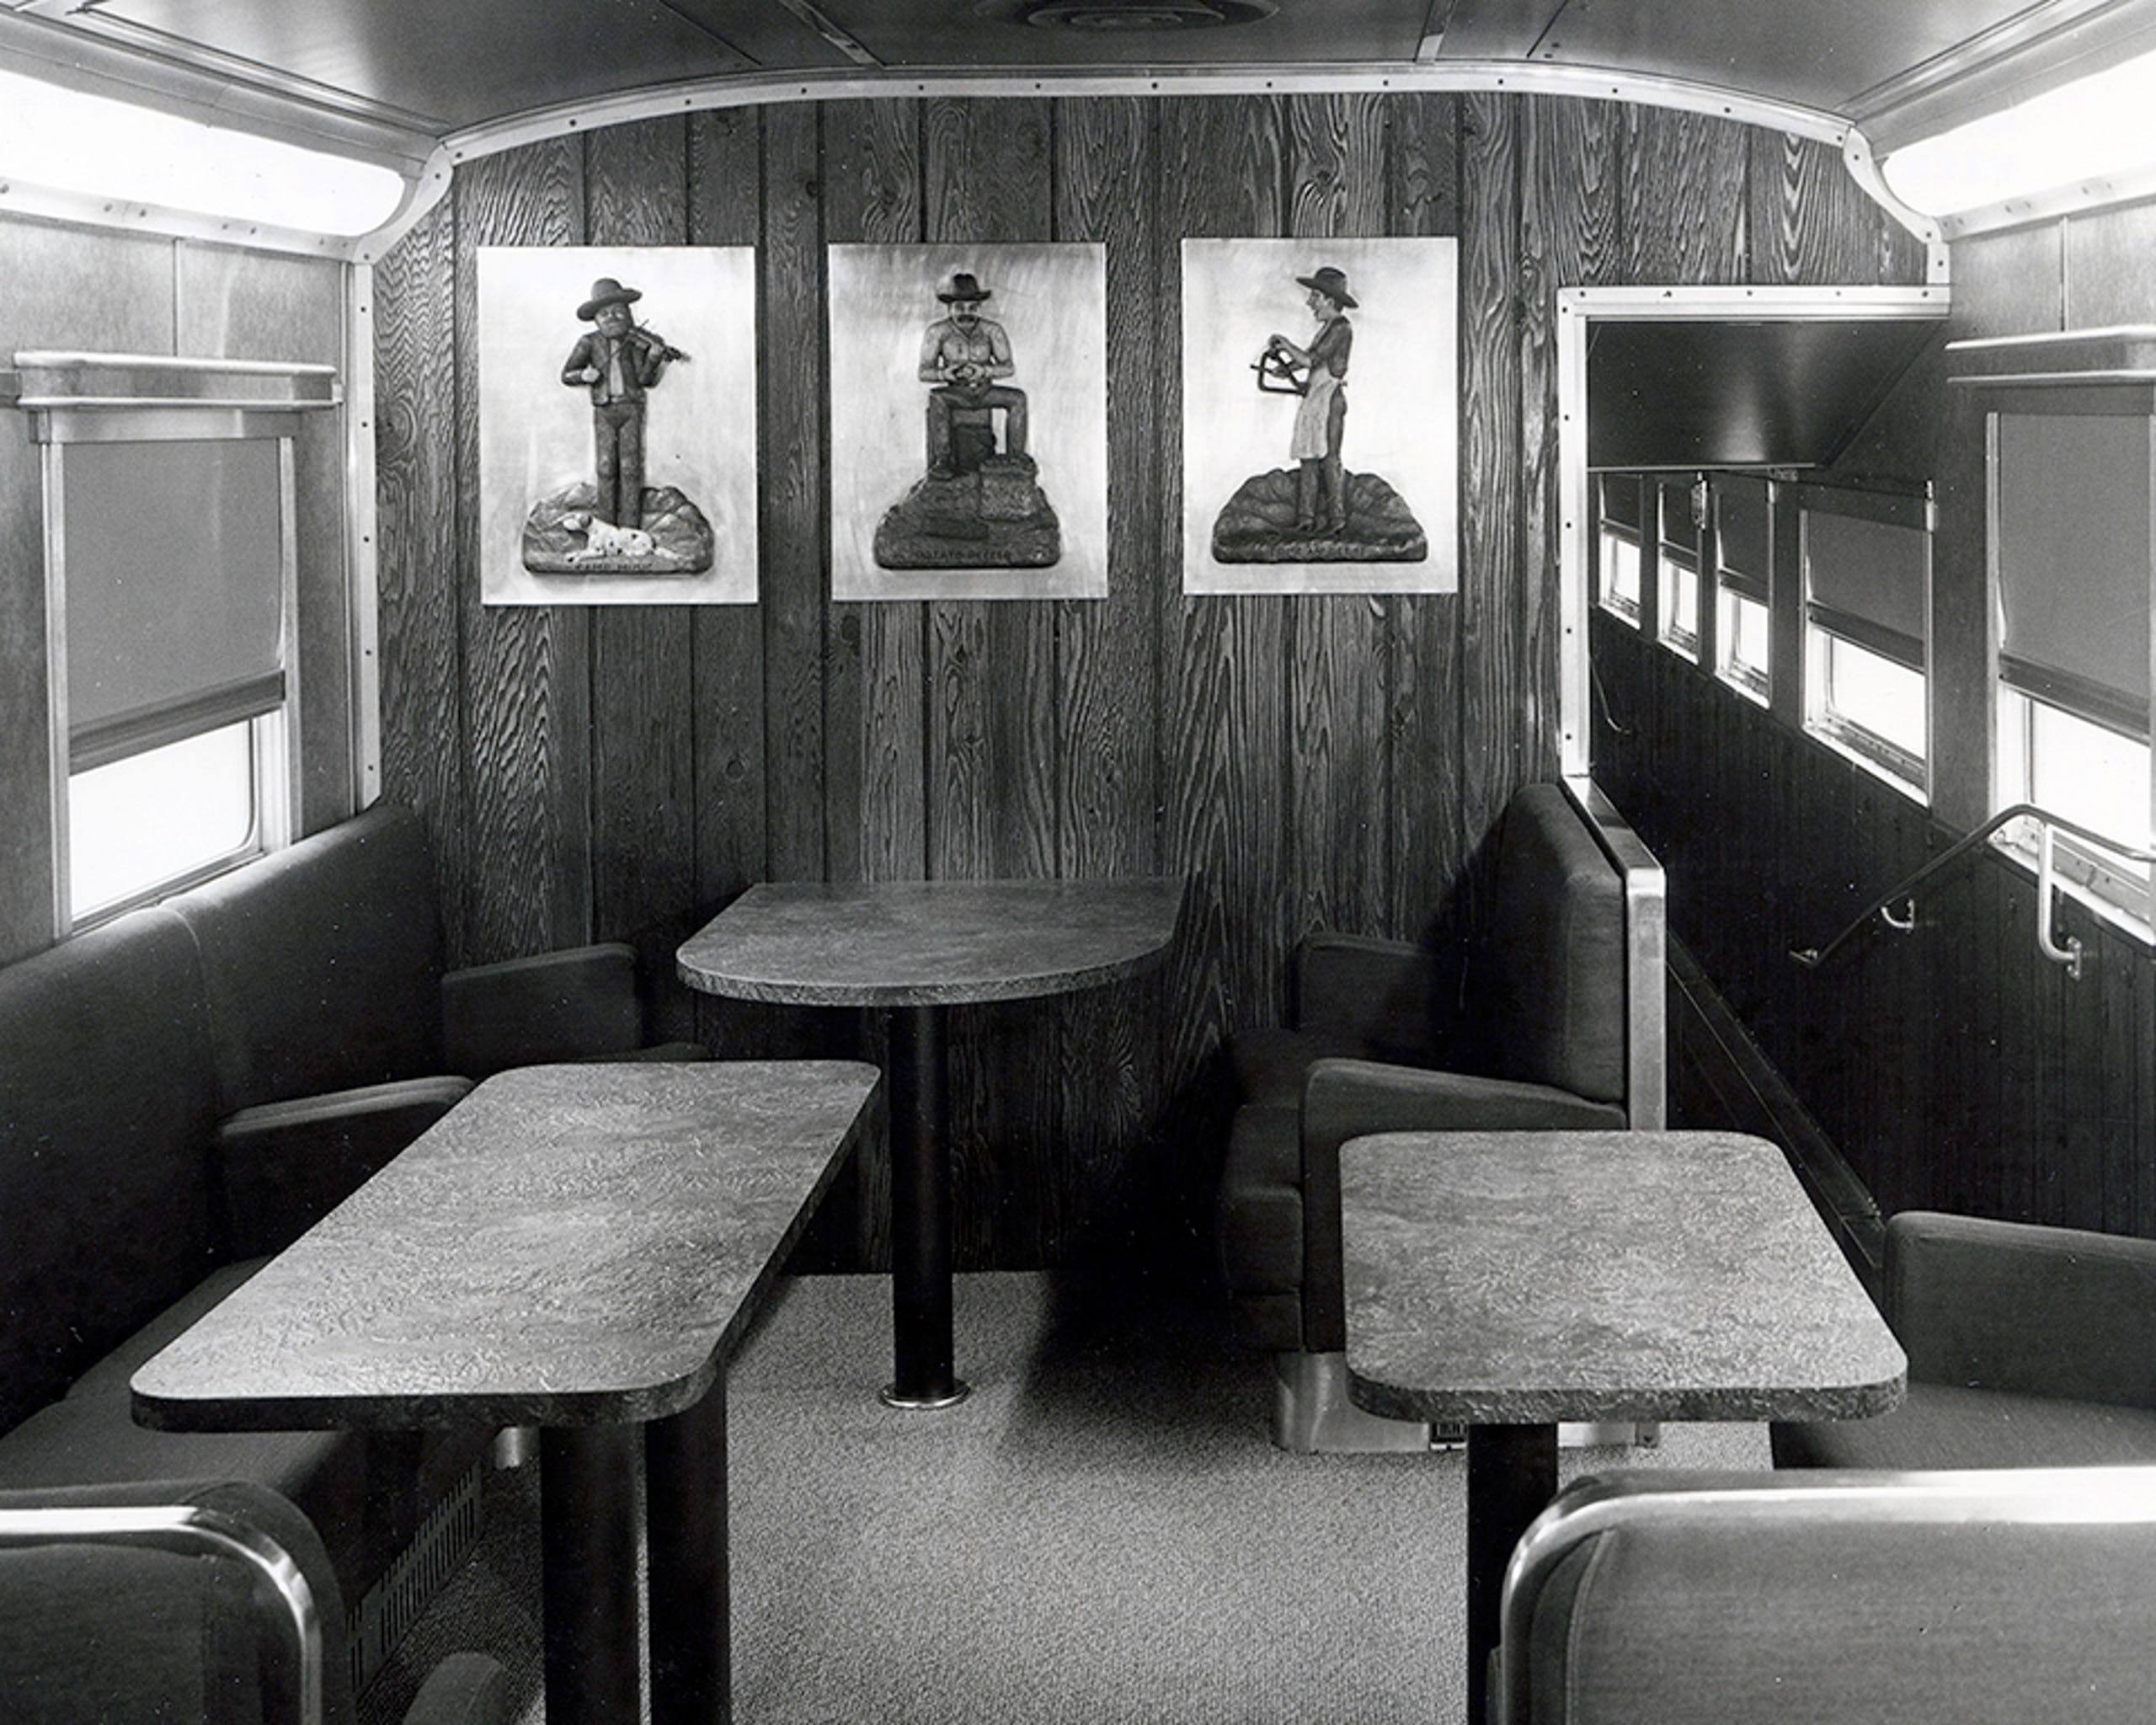 Amtrak Passenger Cars From The 1970s To Today